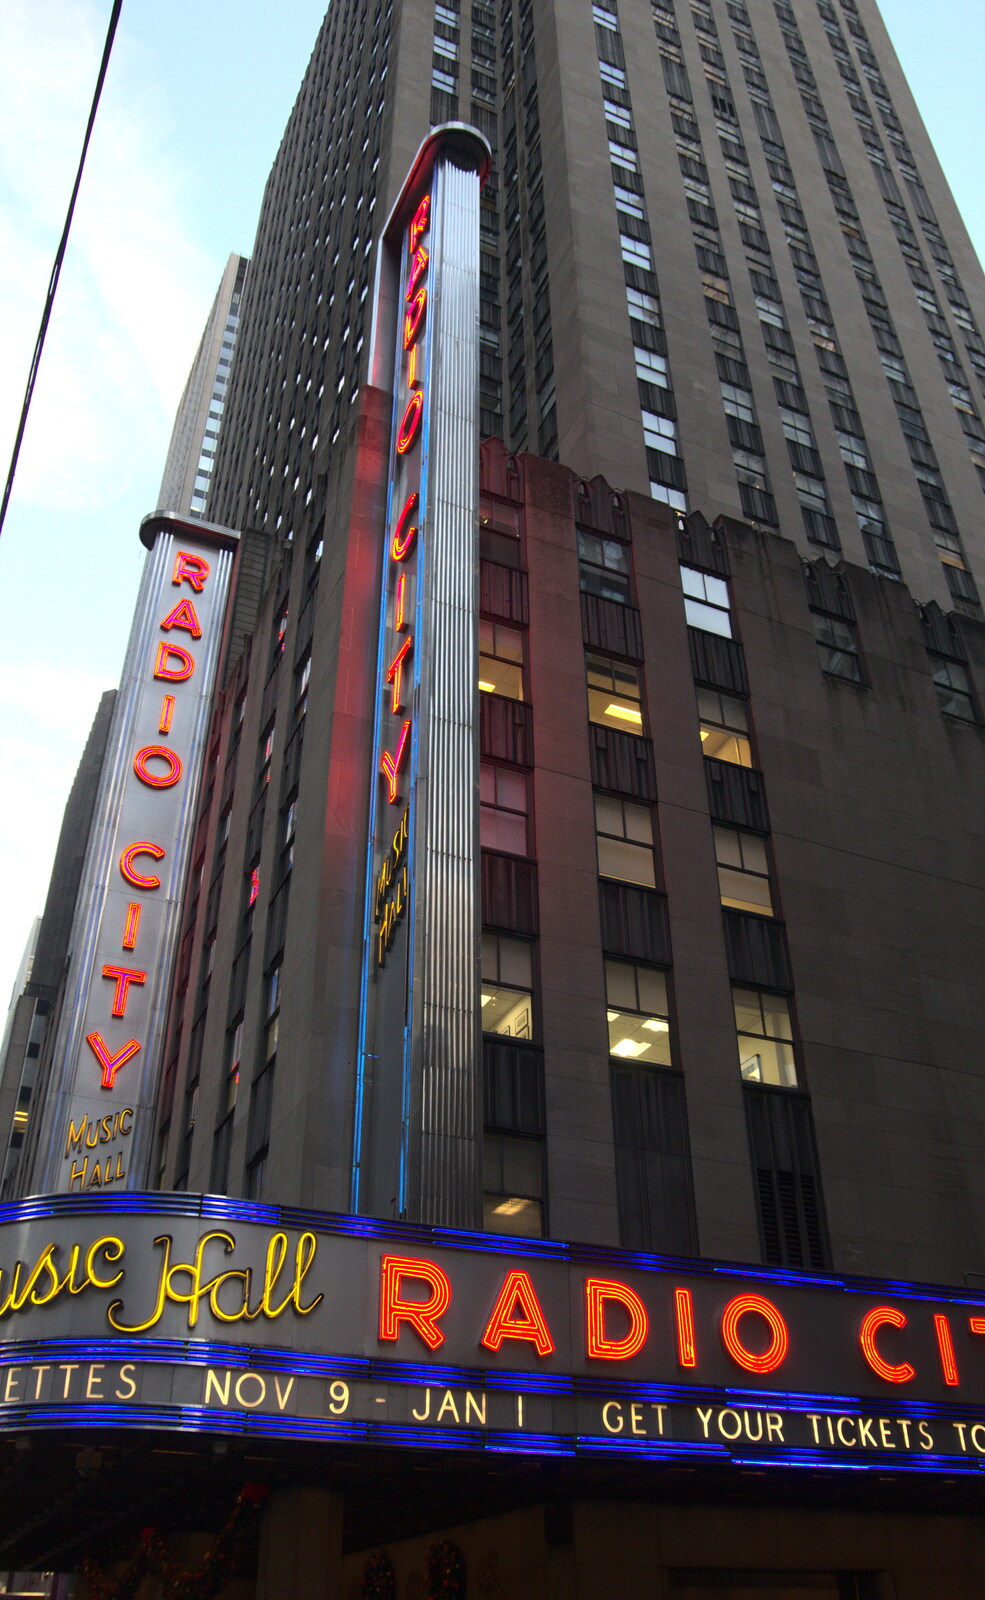 Radio City's neon lights from Open-top Buses and a Day at the Museum, New York, United States - 22nd October 2018